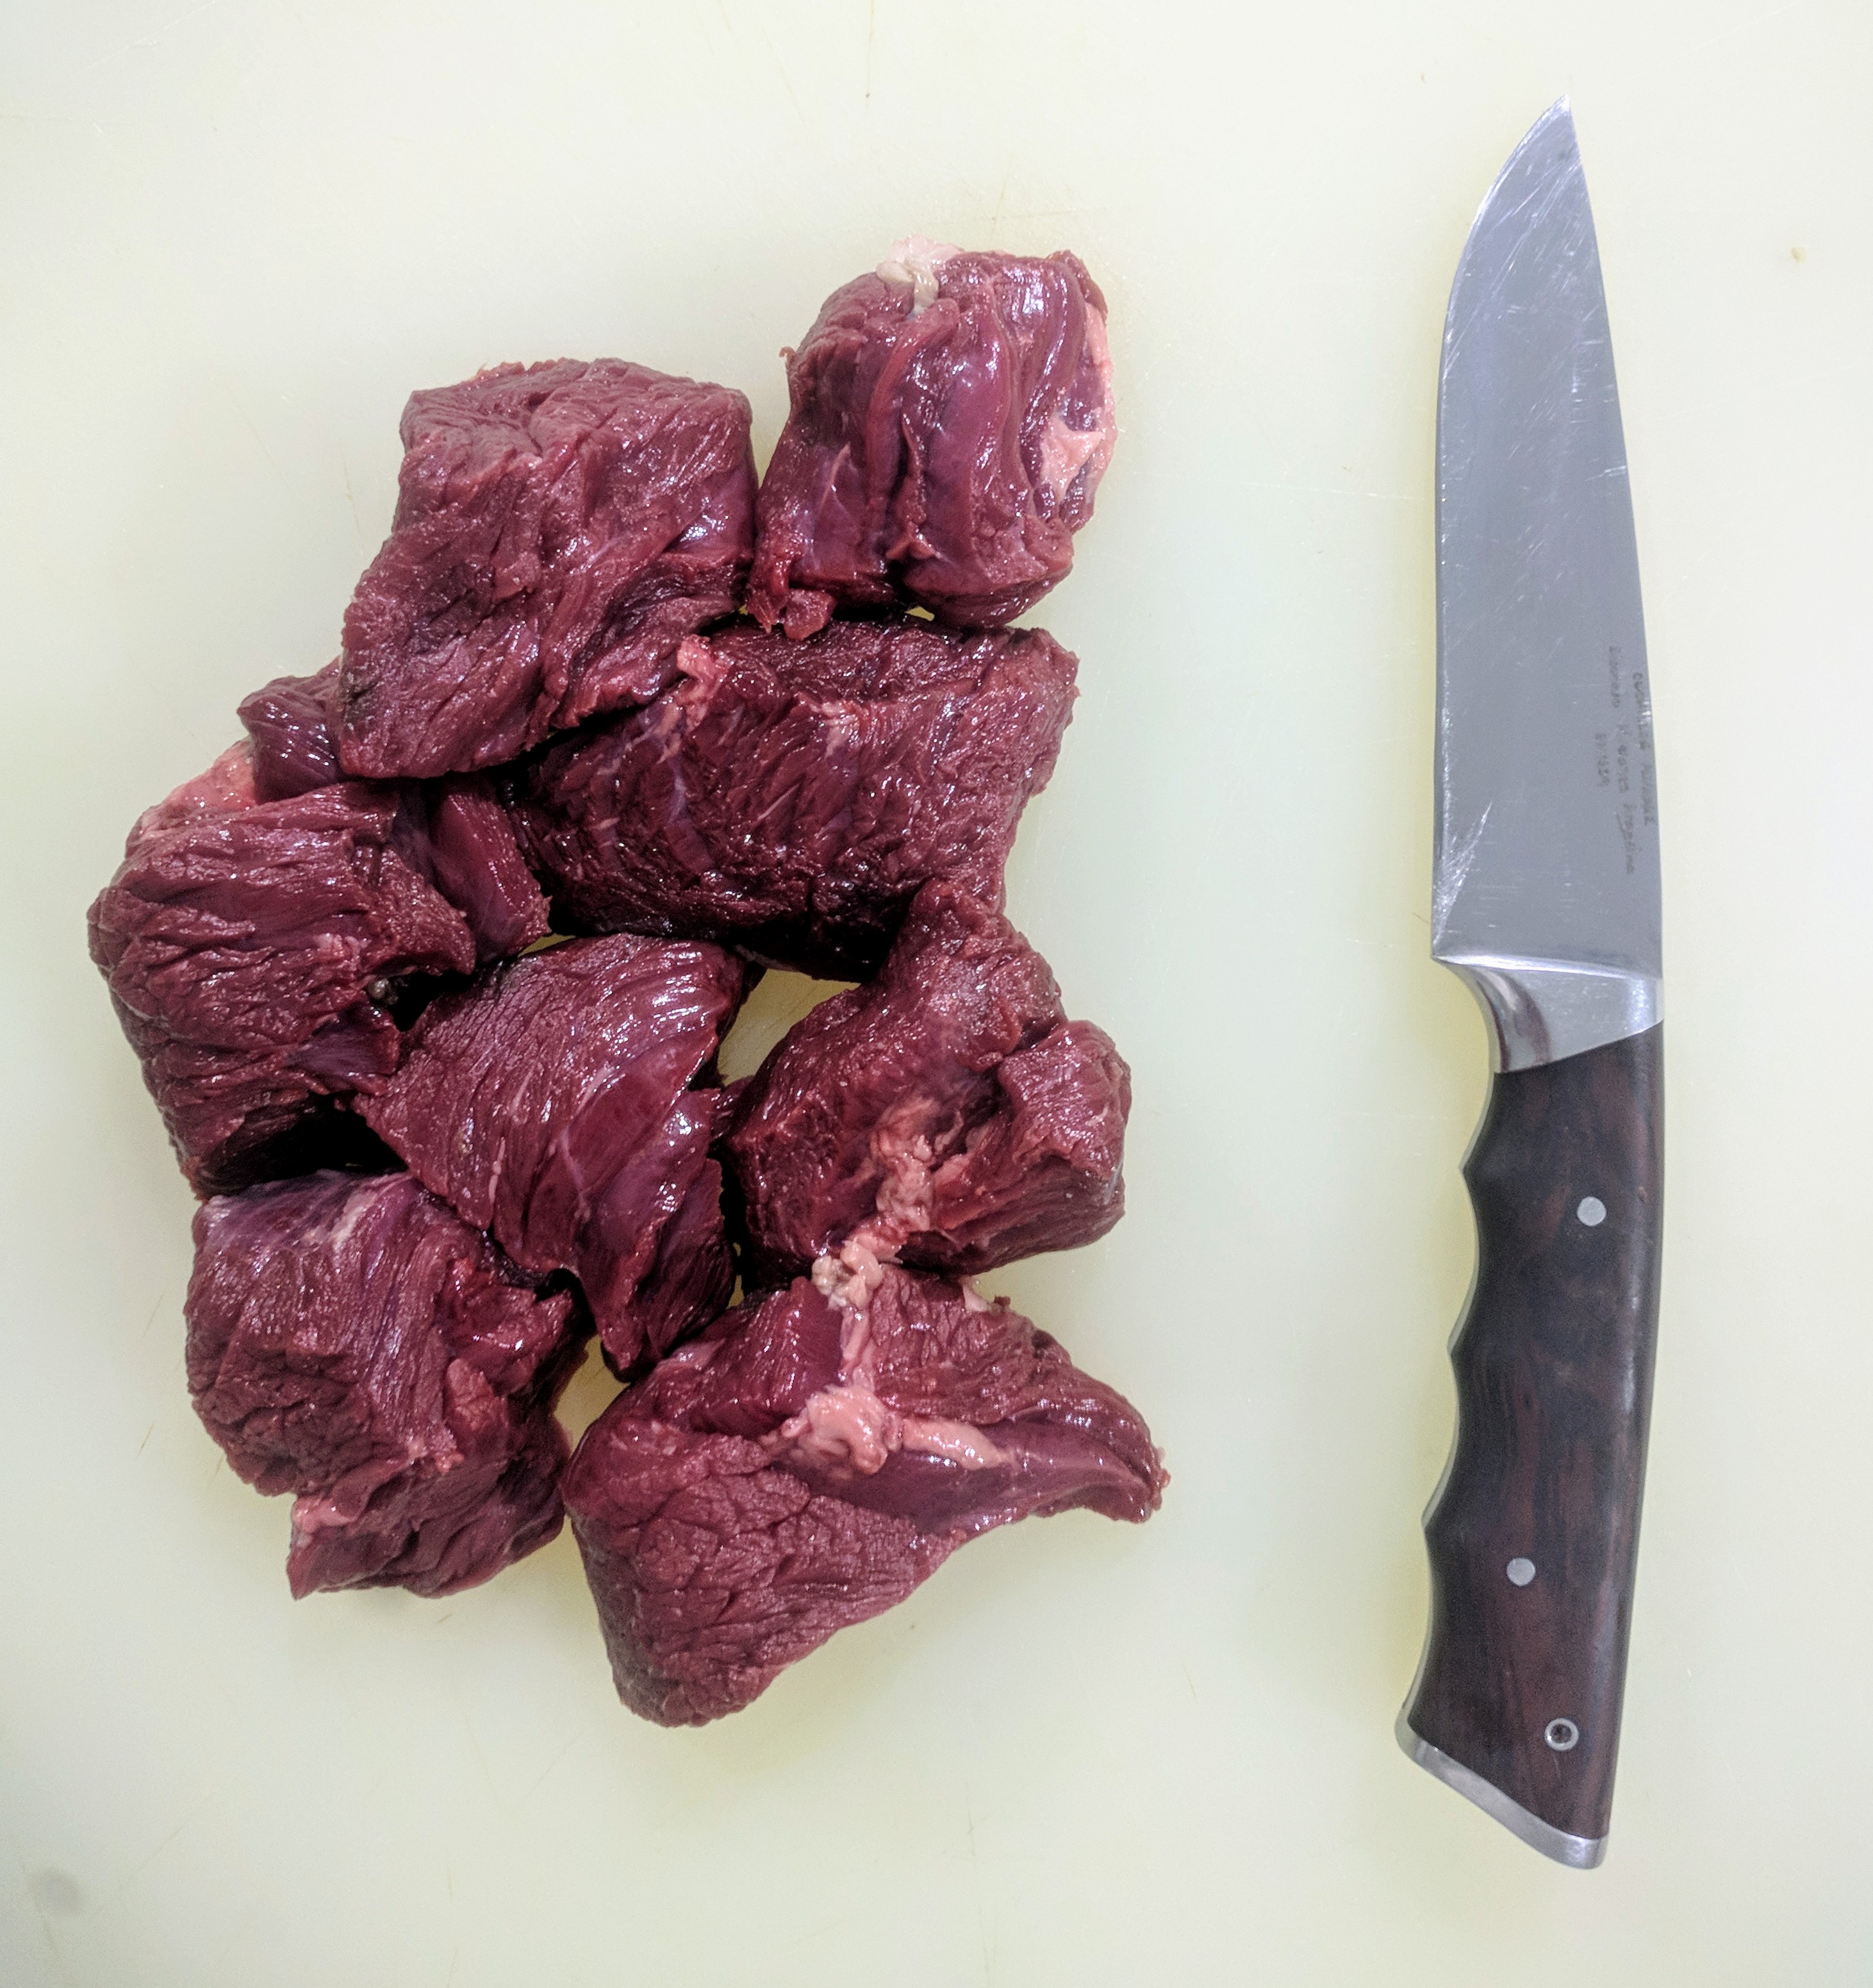 Buy Bear meat goulash at a price of 14 usd with delivery from Russia